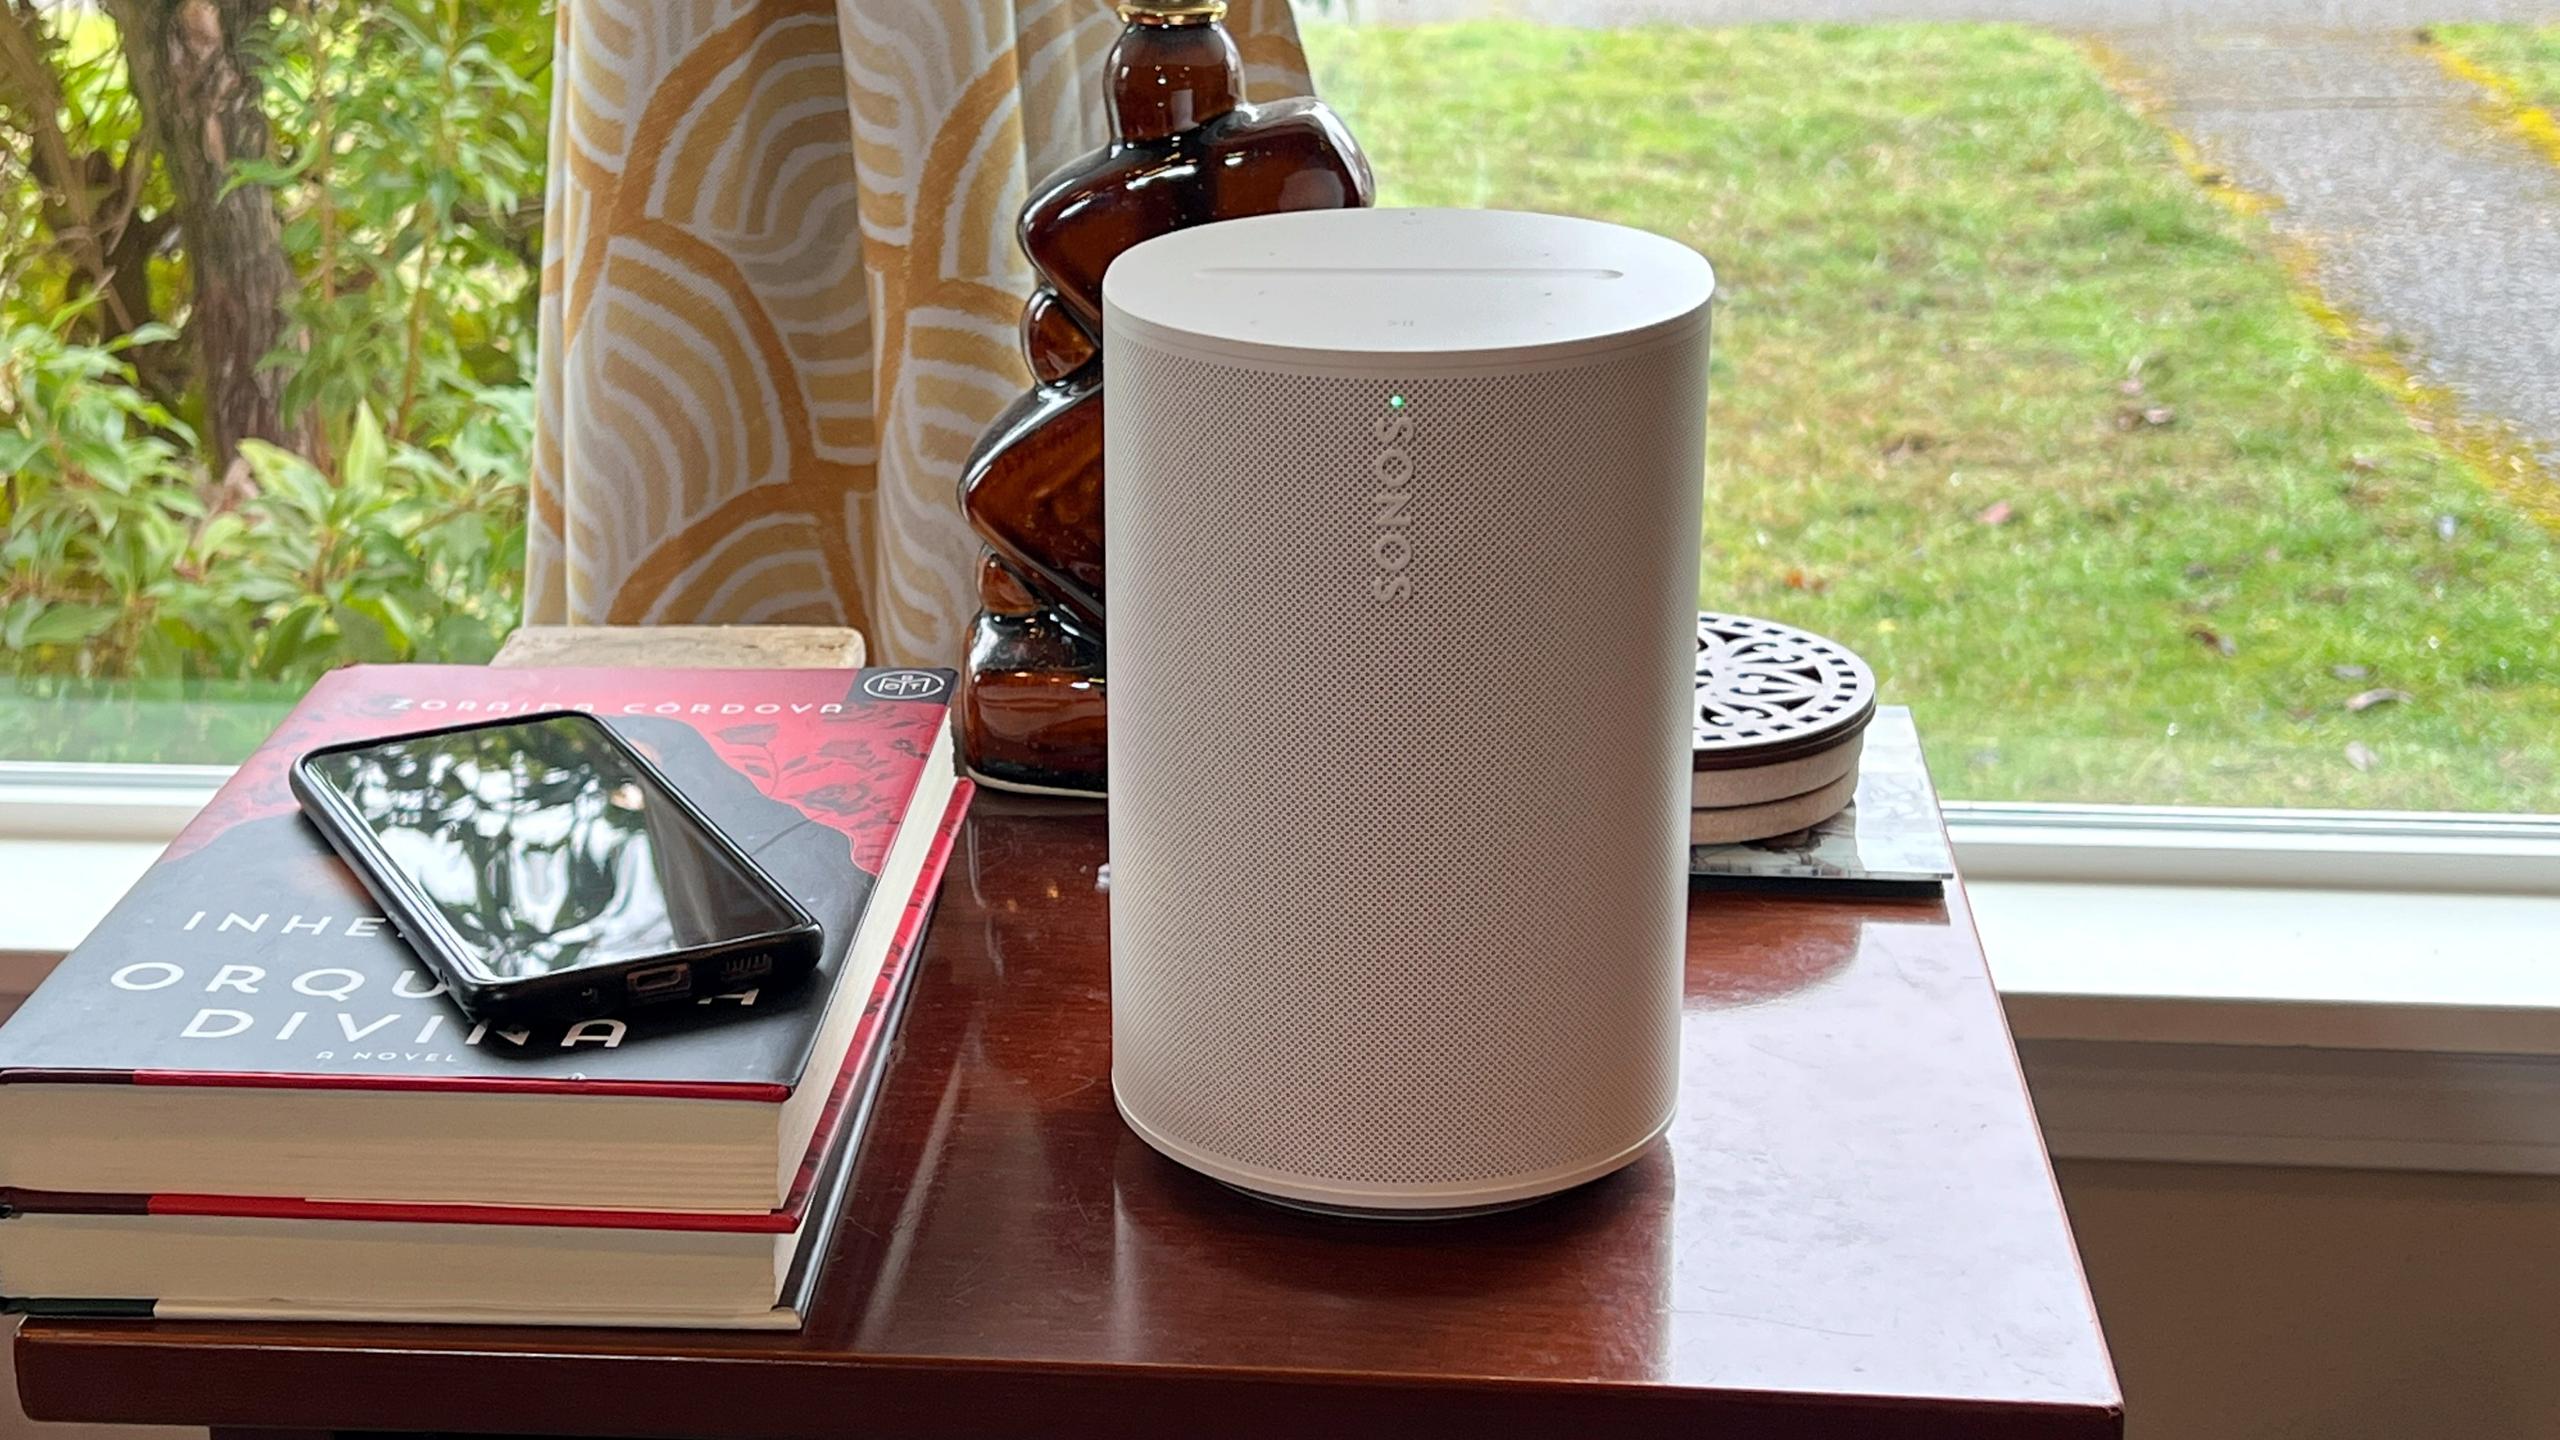 Sonos Era 100 smart speaker review: An Upgrade on Nearly All Fronts -